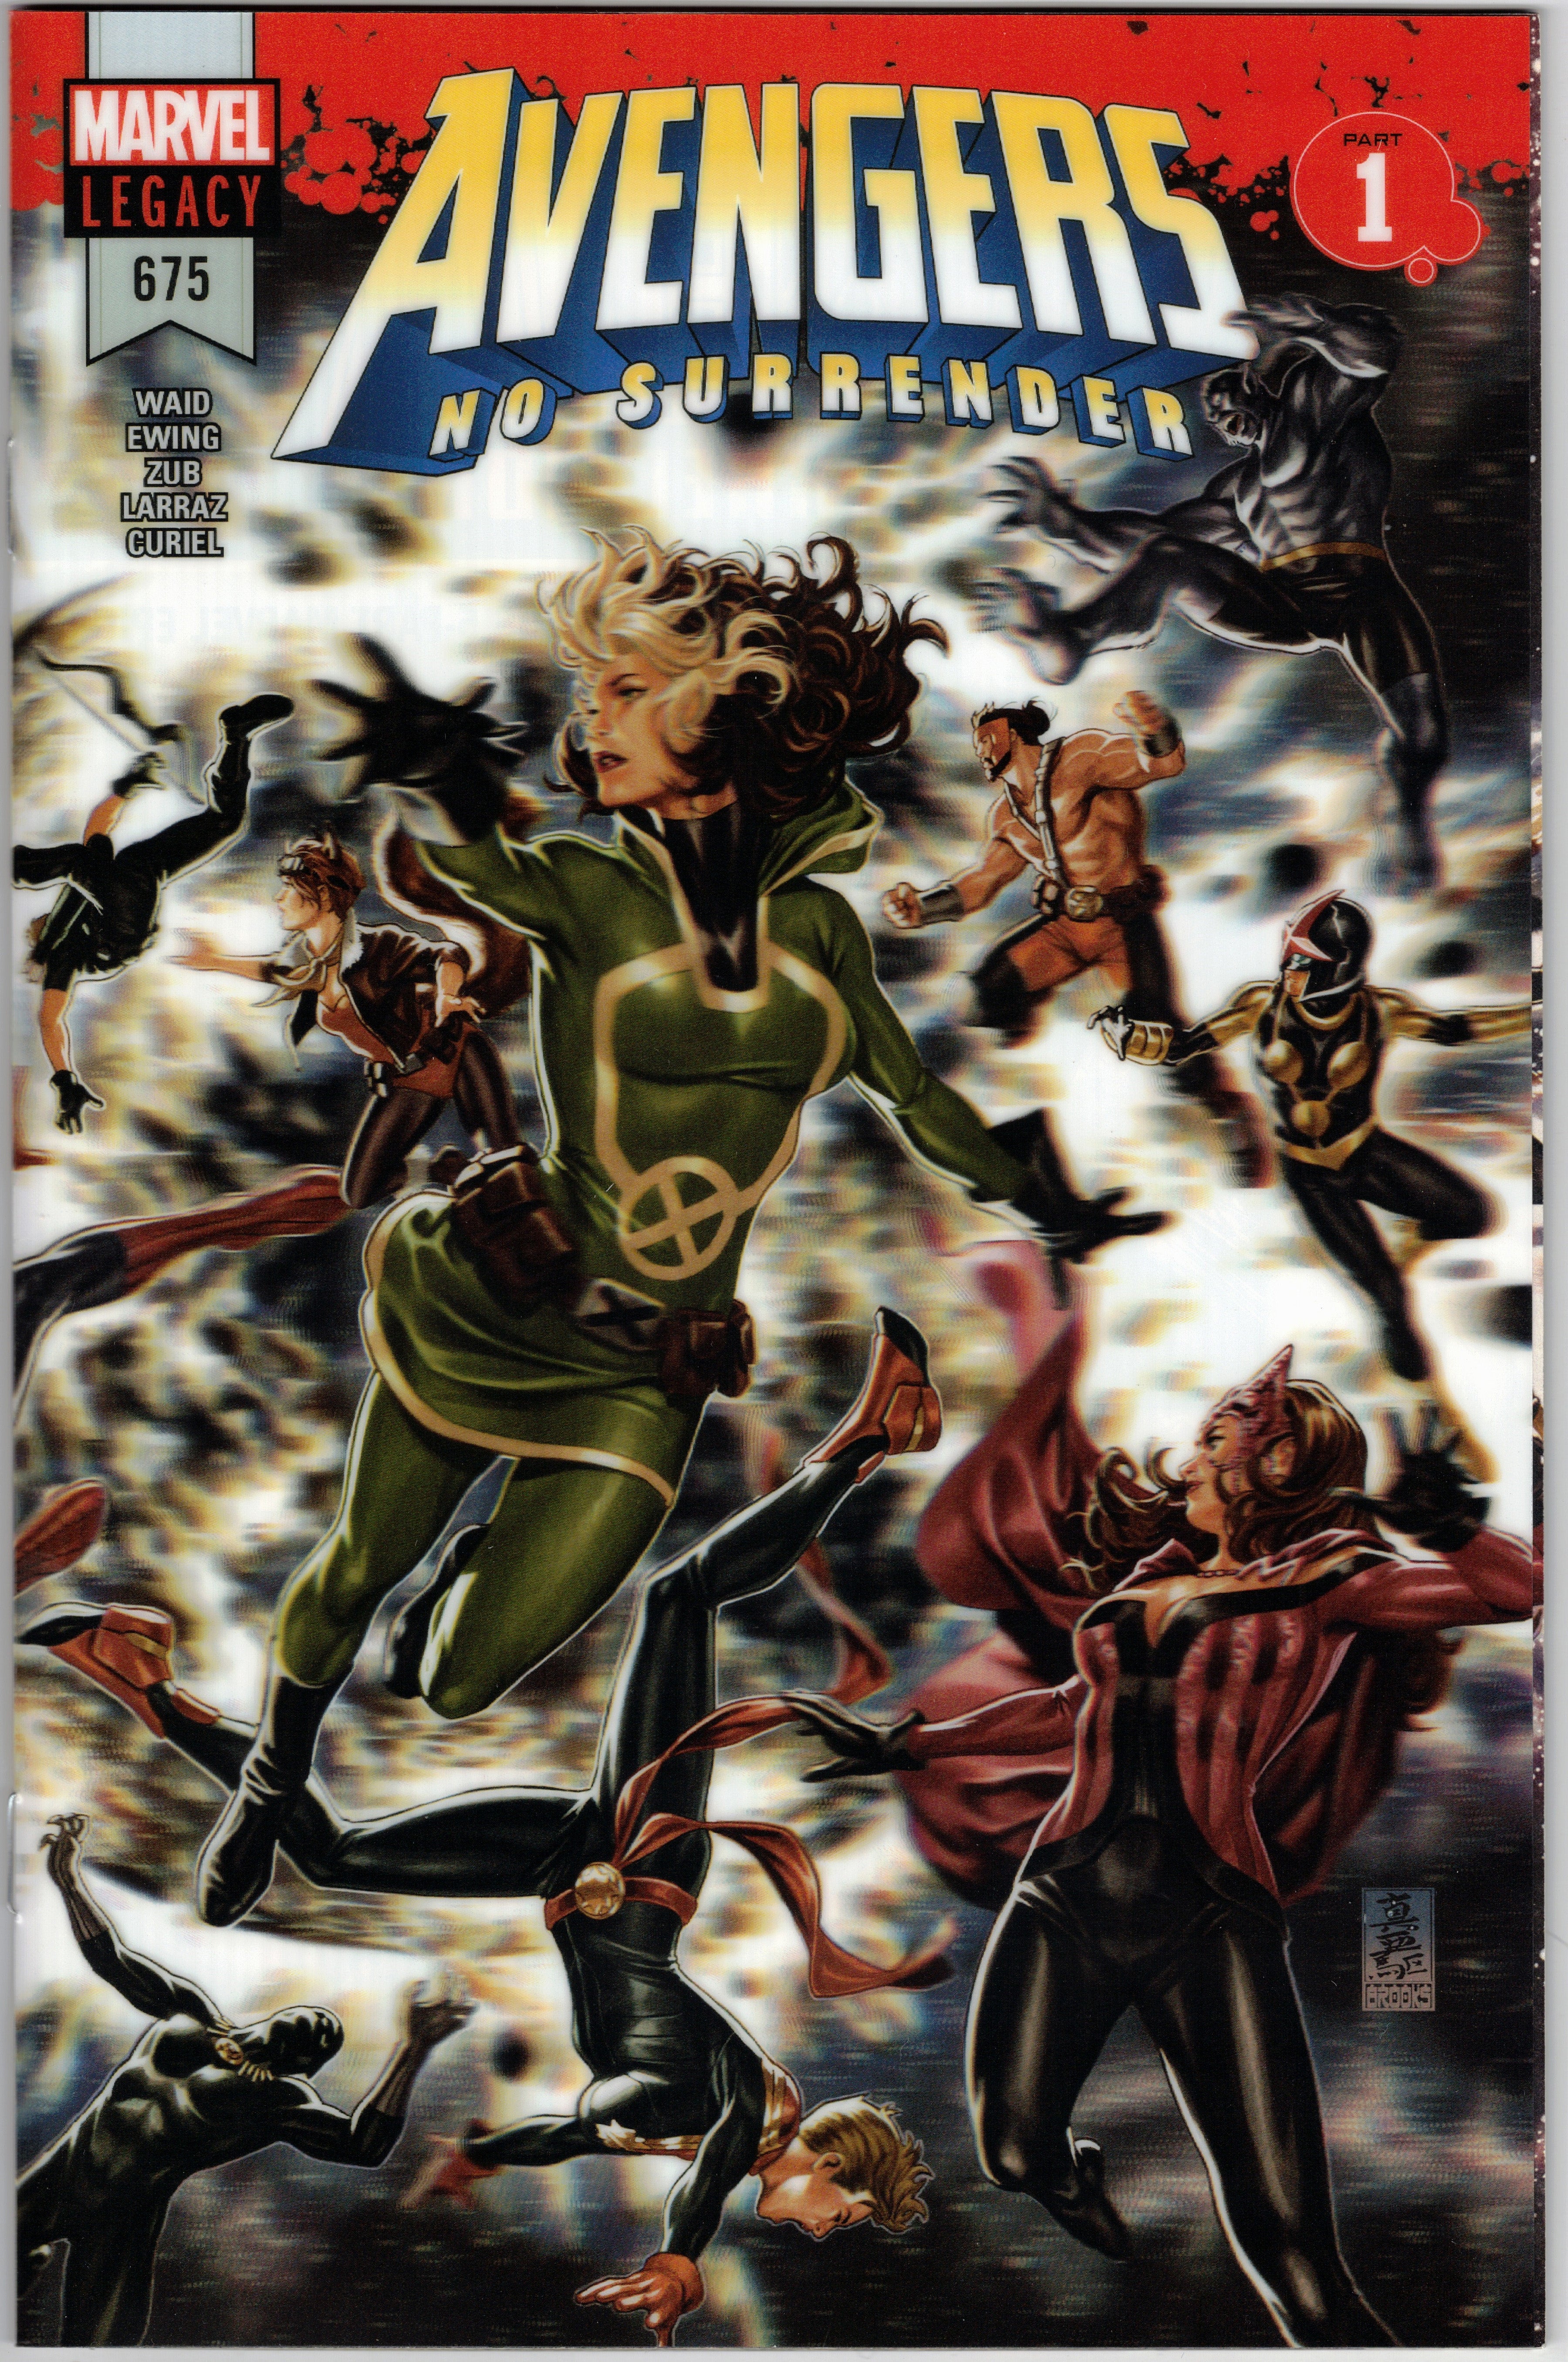 Photo of Avengers, Vol. 7 (2018) Issue 675A - Near Mint Comic sold by Stronghold Collectibles